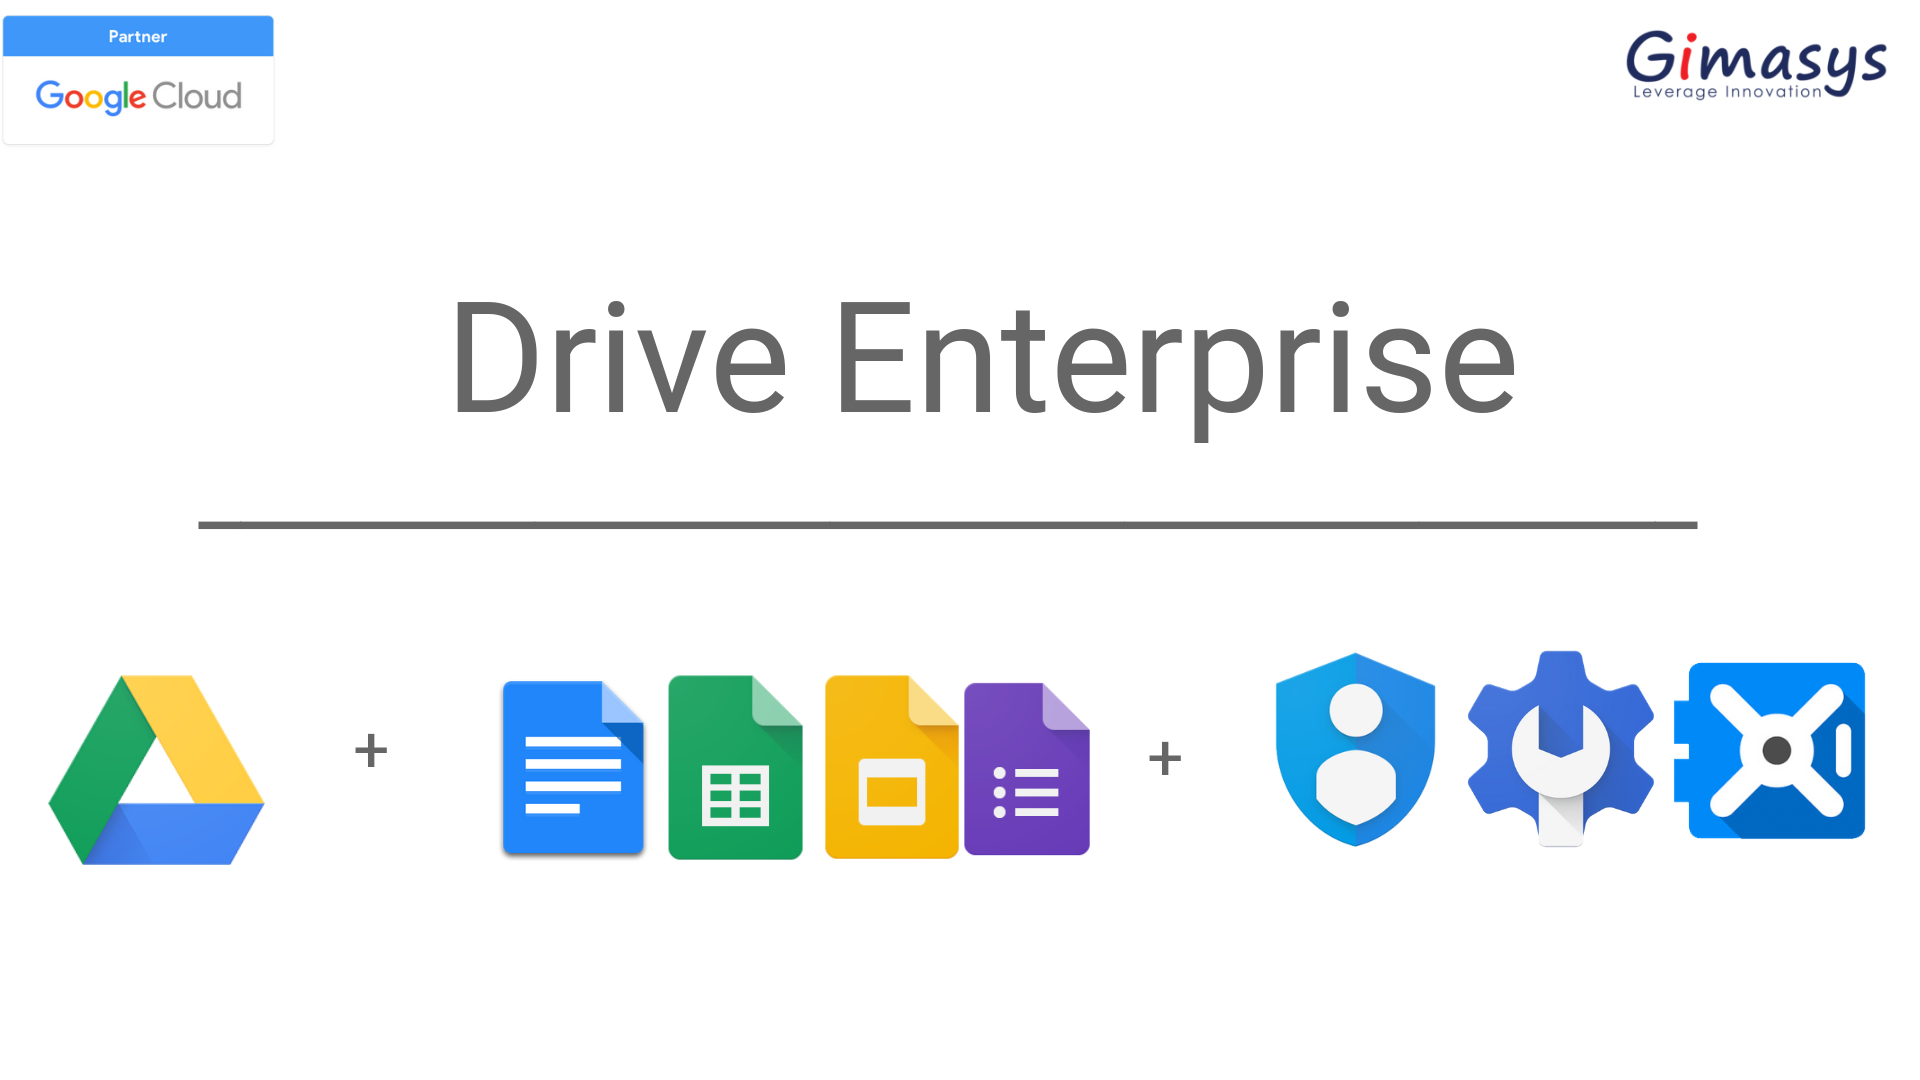 Everything you need to know about Google's Drive Enterprise